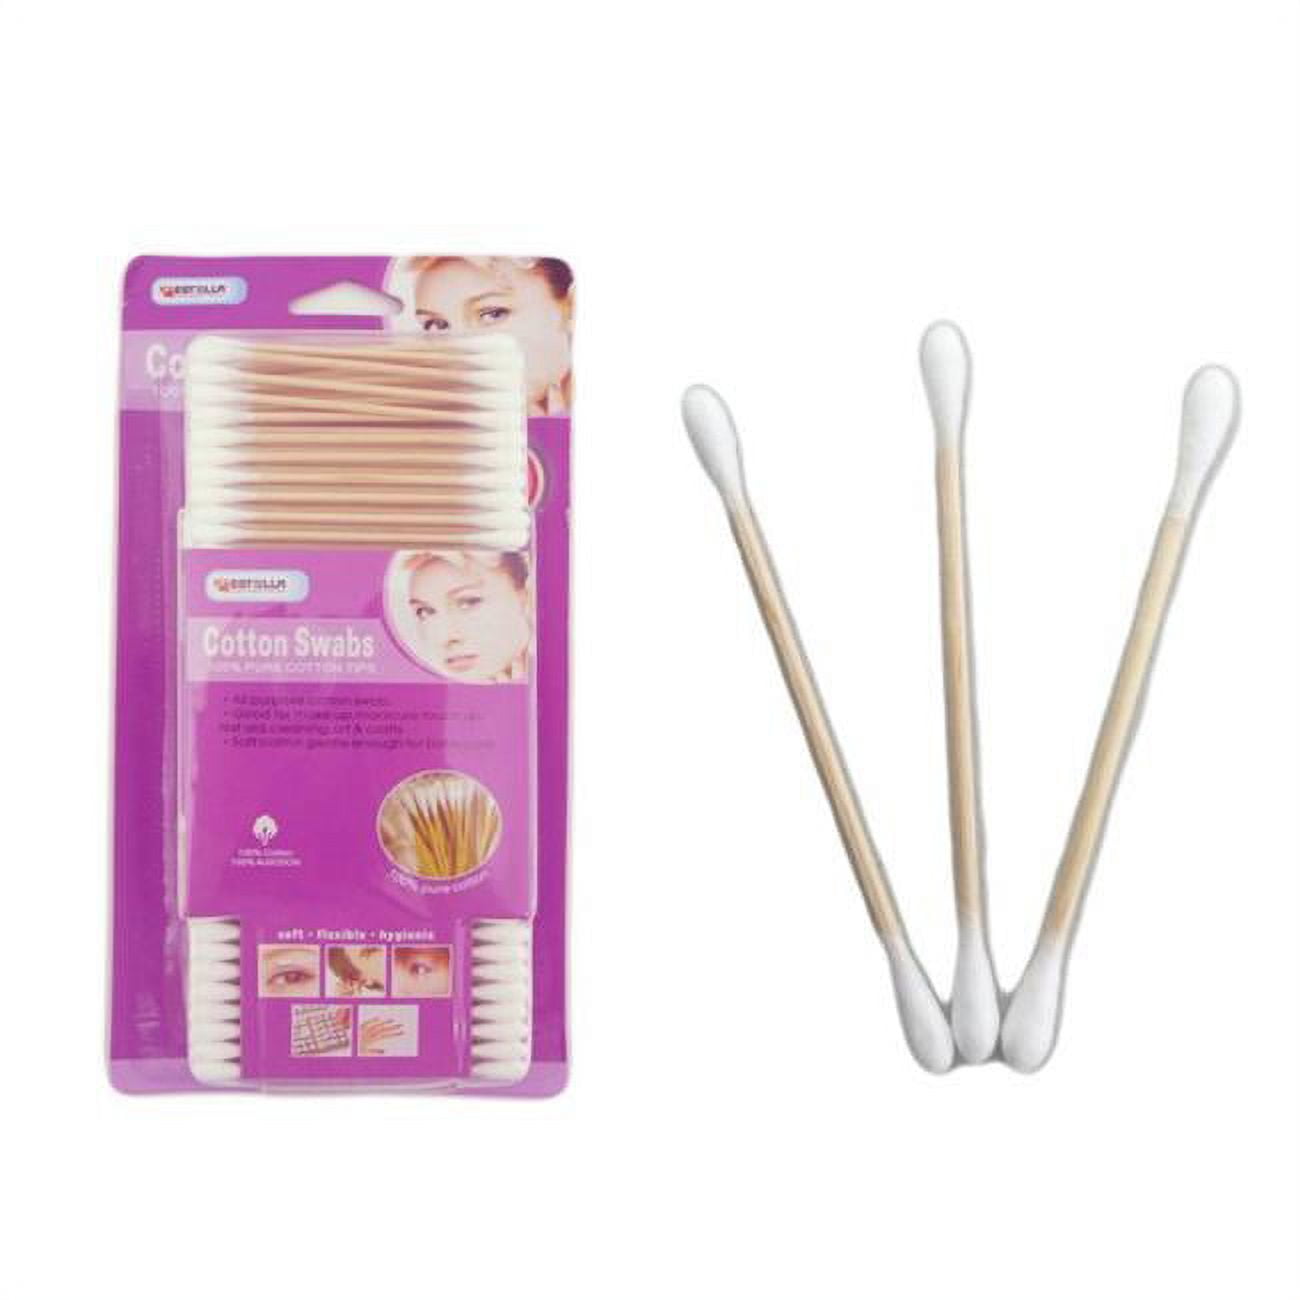 Picture of Familymaid 23731 Wooden Cotton Swab, 550 Counts - Pack of 72